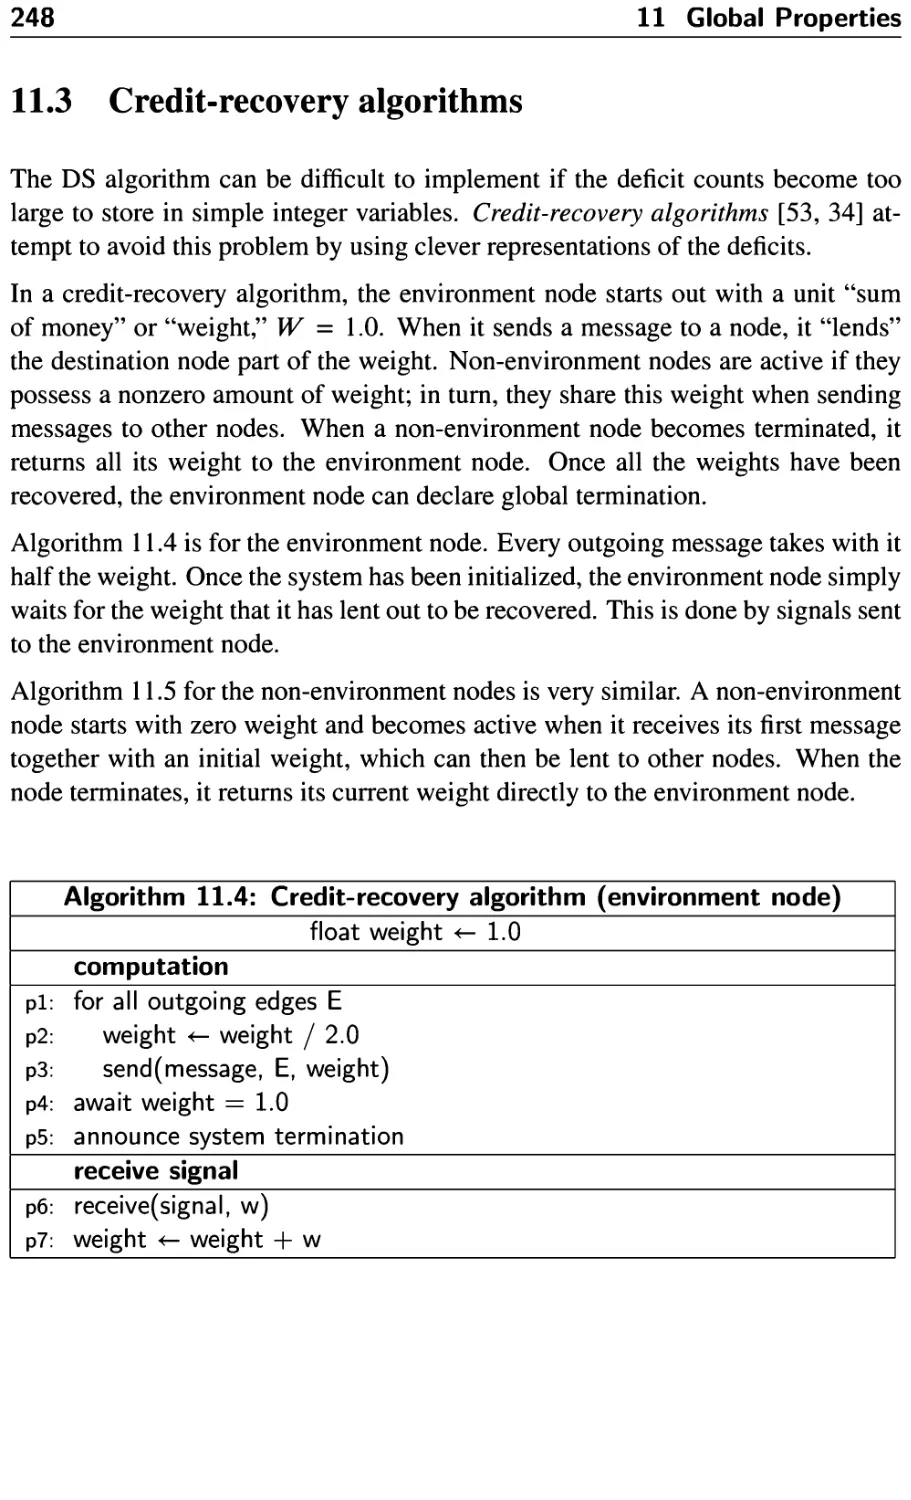 11.3 Credit-recovery algorithms